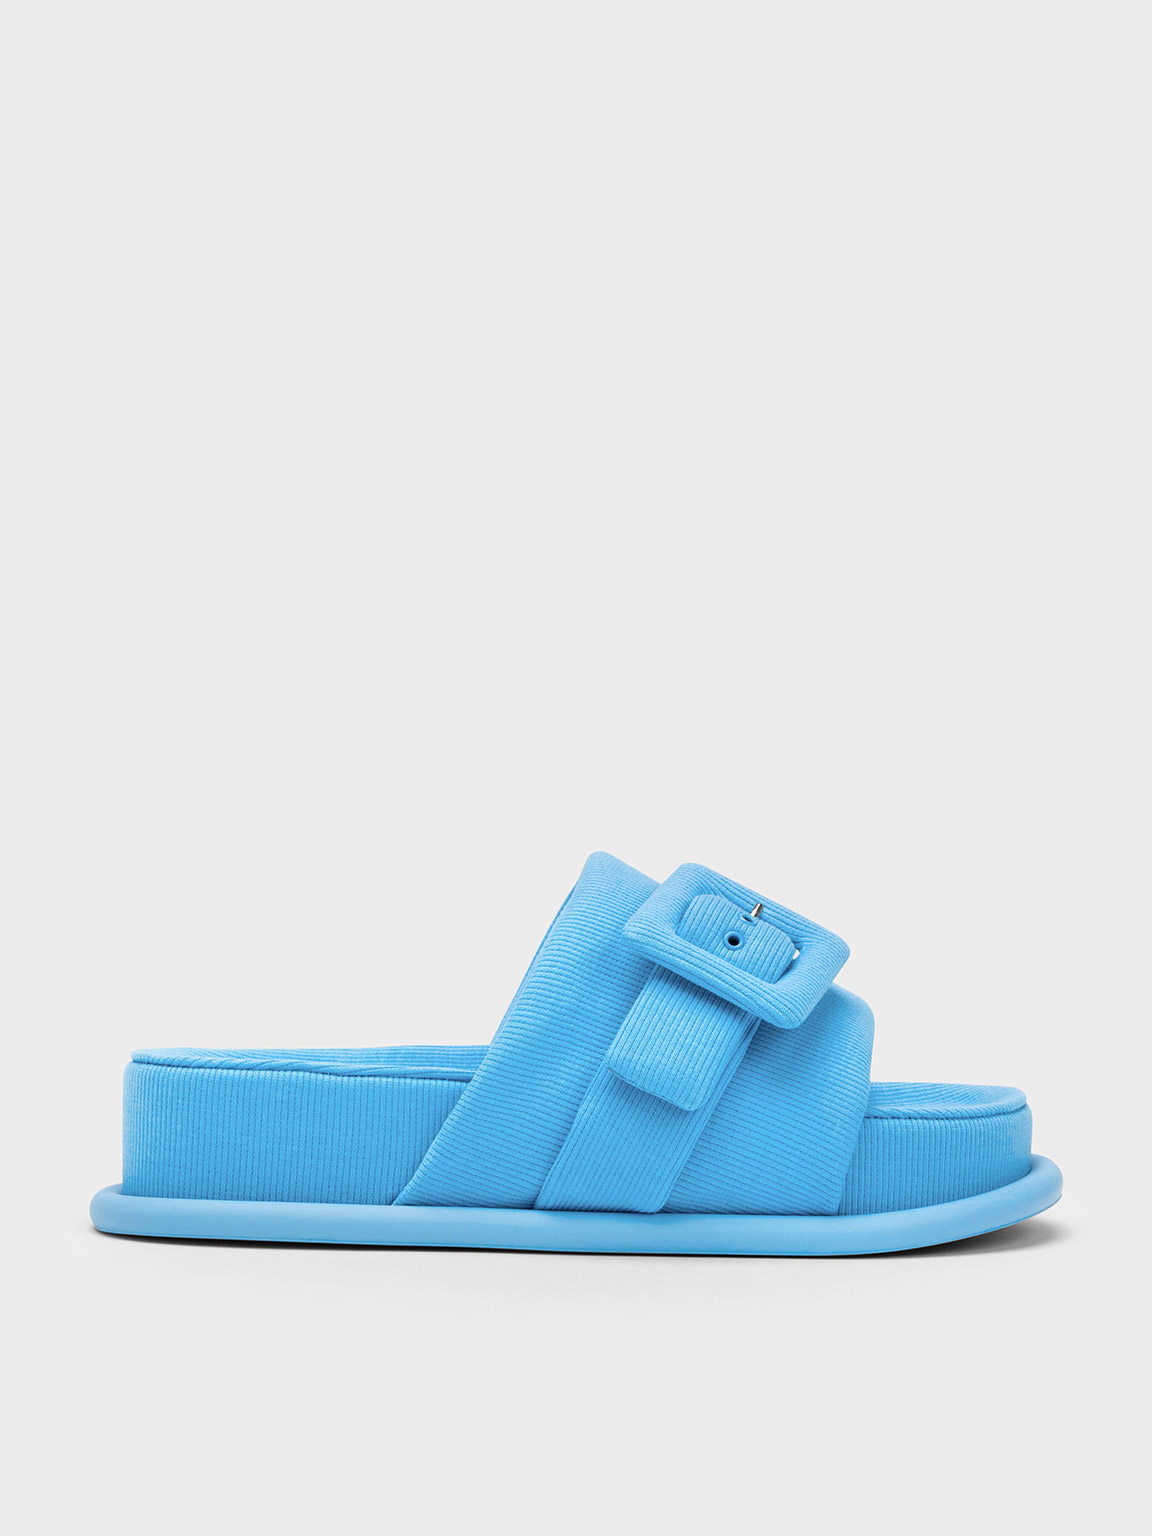 Charles & Keith Woven Buckled Slide Sandals In Blue